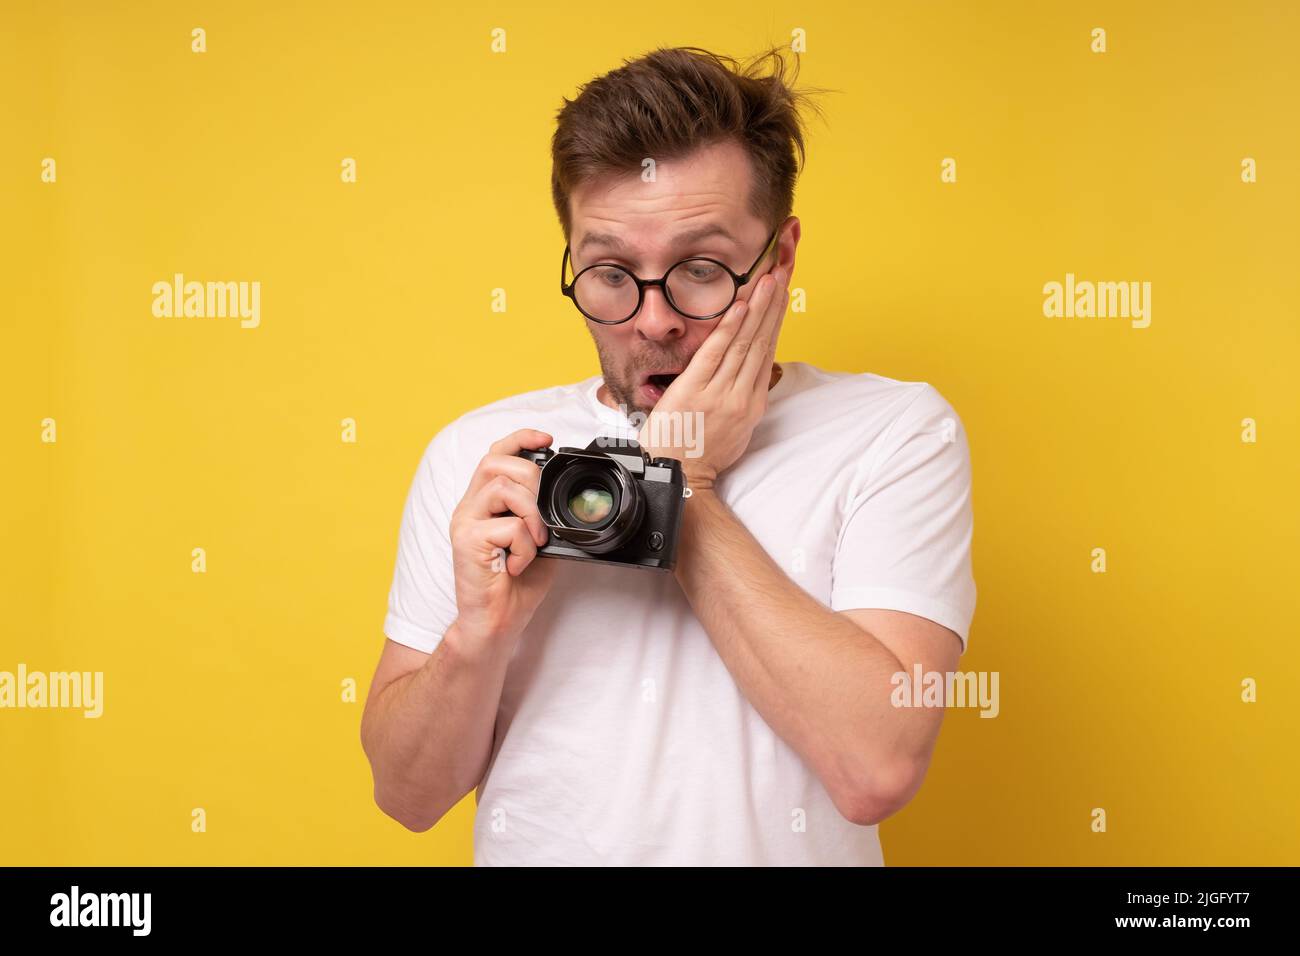 Young photographer caucasian man being surprised and shocked looking at camera Stock Photo